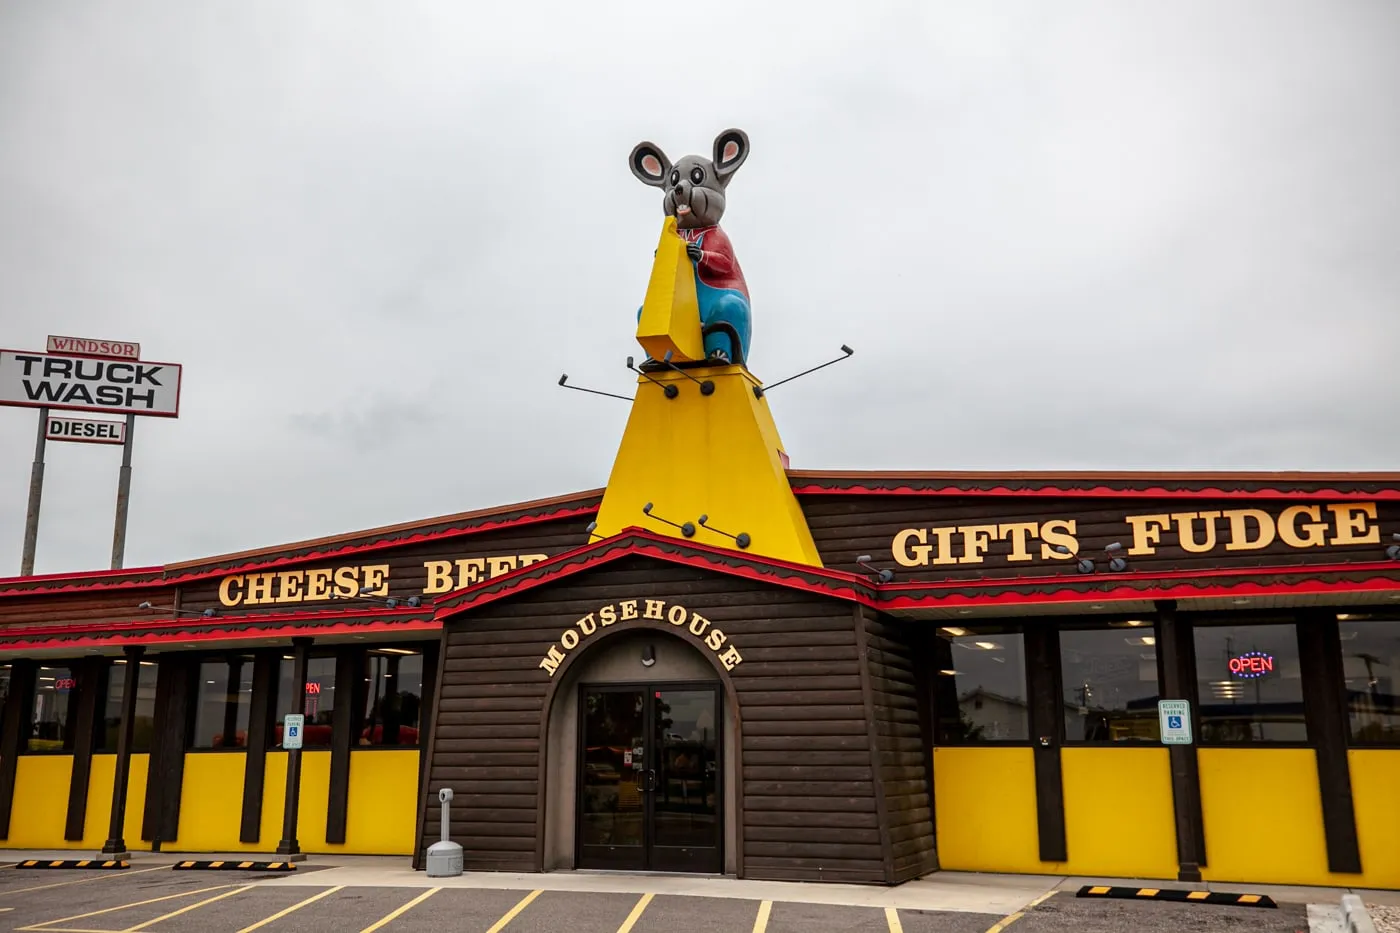 Giant Mouse at Mousehouse Cheesehaus in Windsor, Wisconsin | Cheese Shop in Wisconsin | Wisconsin Roadside Attractions